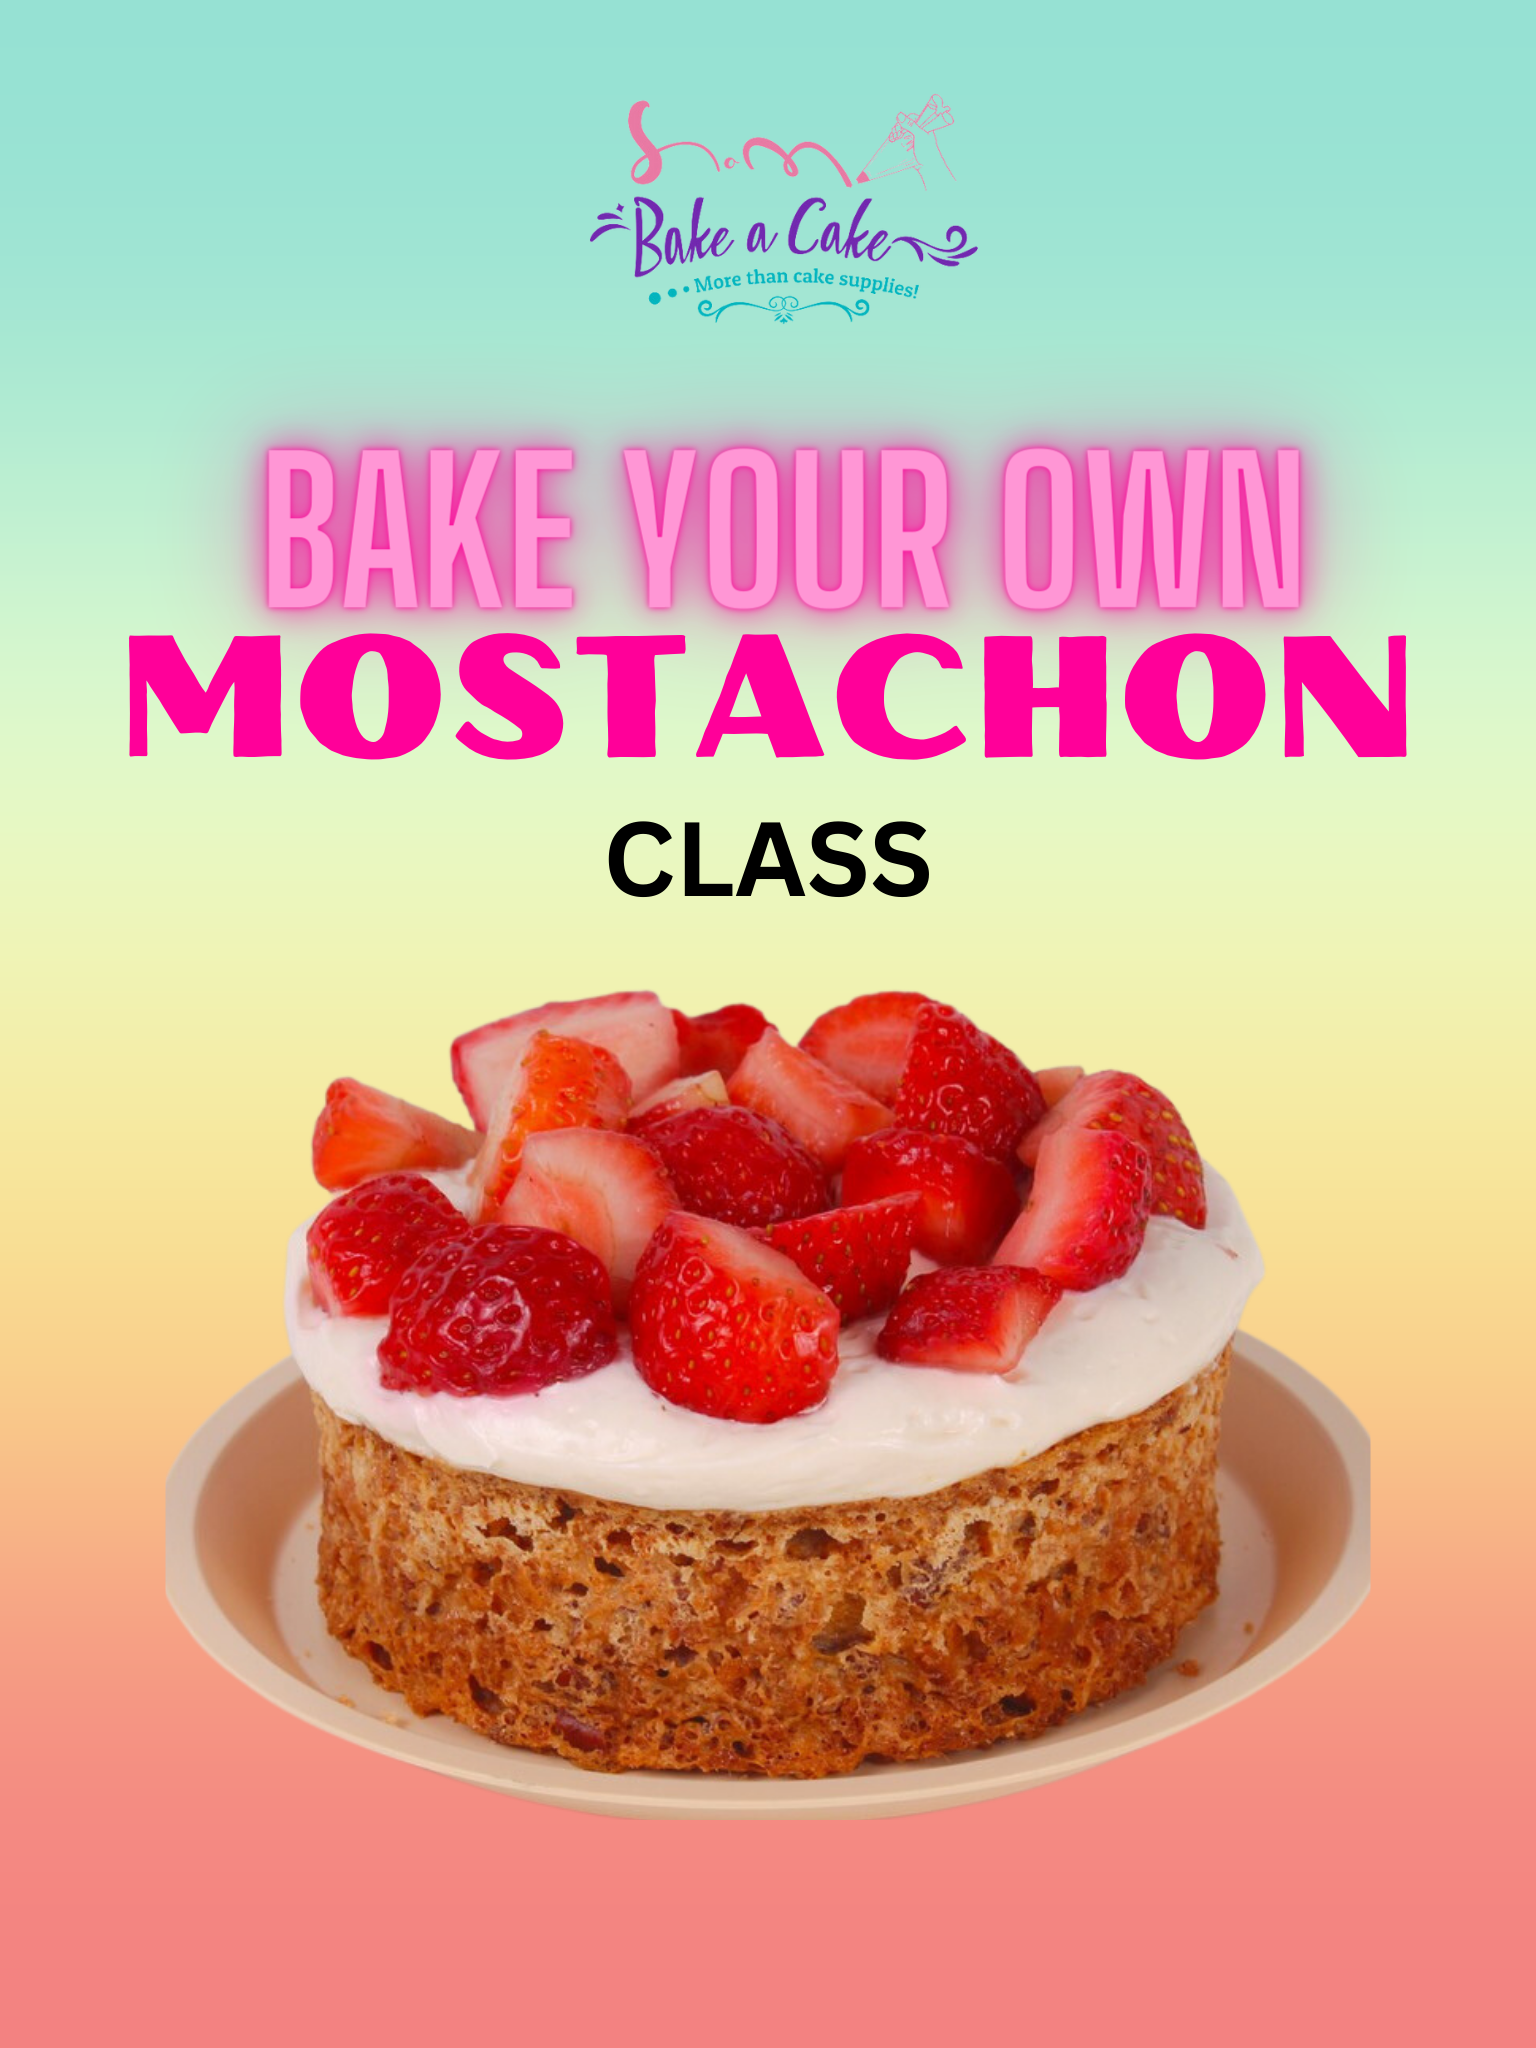 Announcing Cake Classes! - A Slice of Sweet